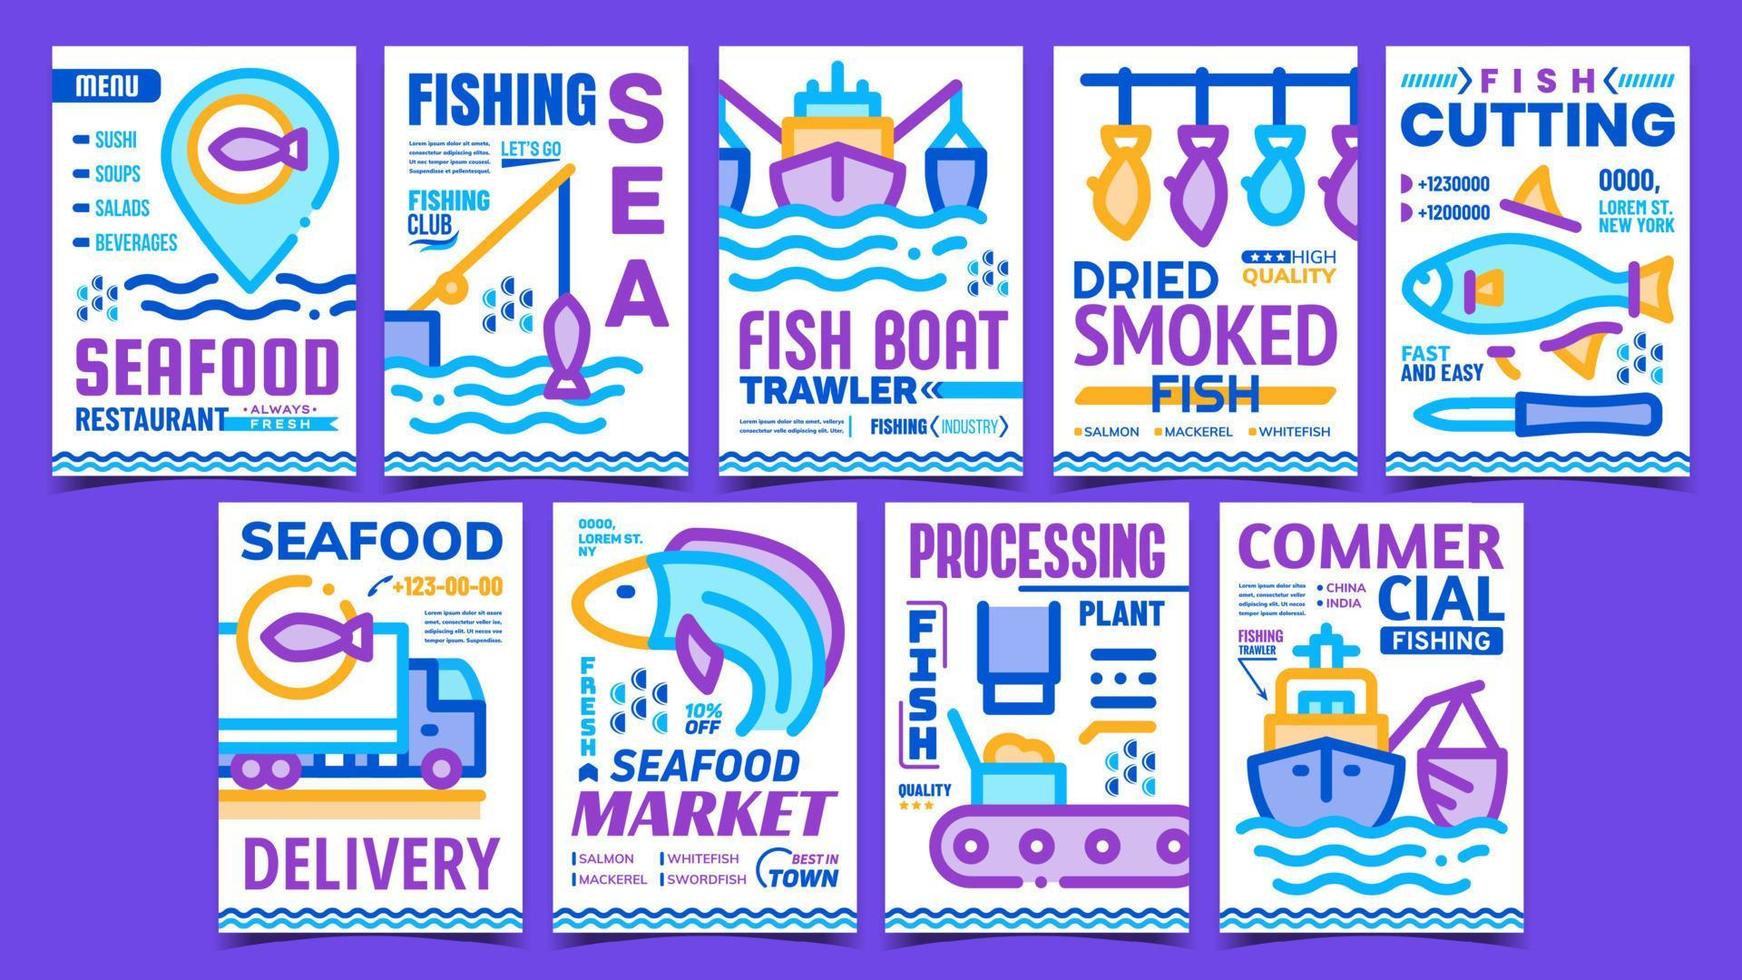 Fishing Industry Advertising Posters Set Vector